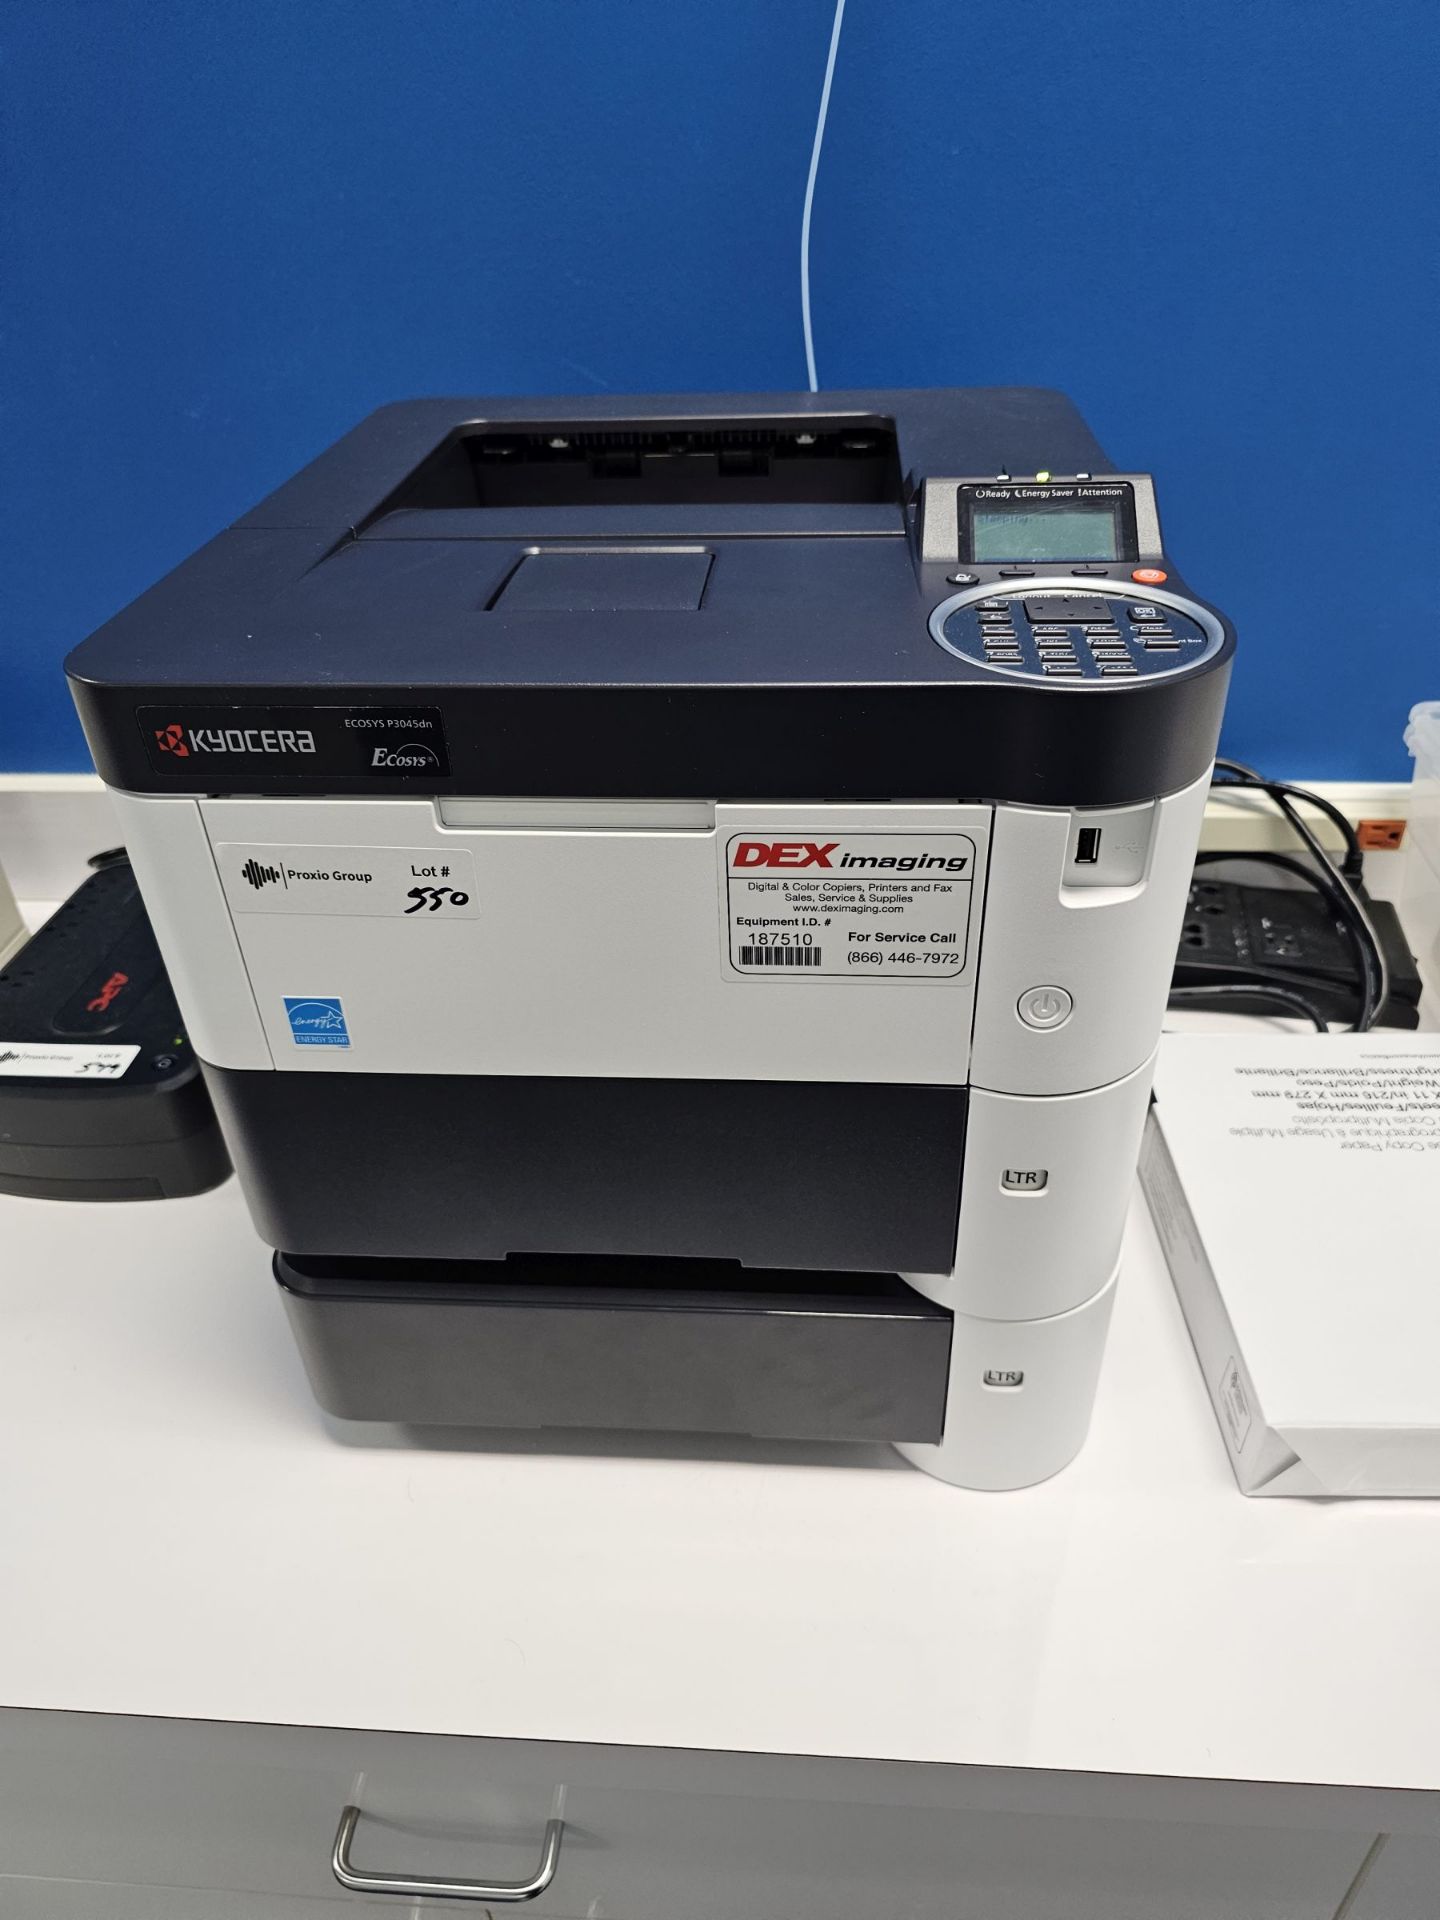 Kyocera Ecosys Series Model P3045dn Duplexing Network Laser Printer - Image 3 of 5